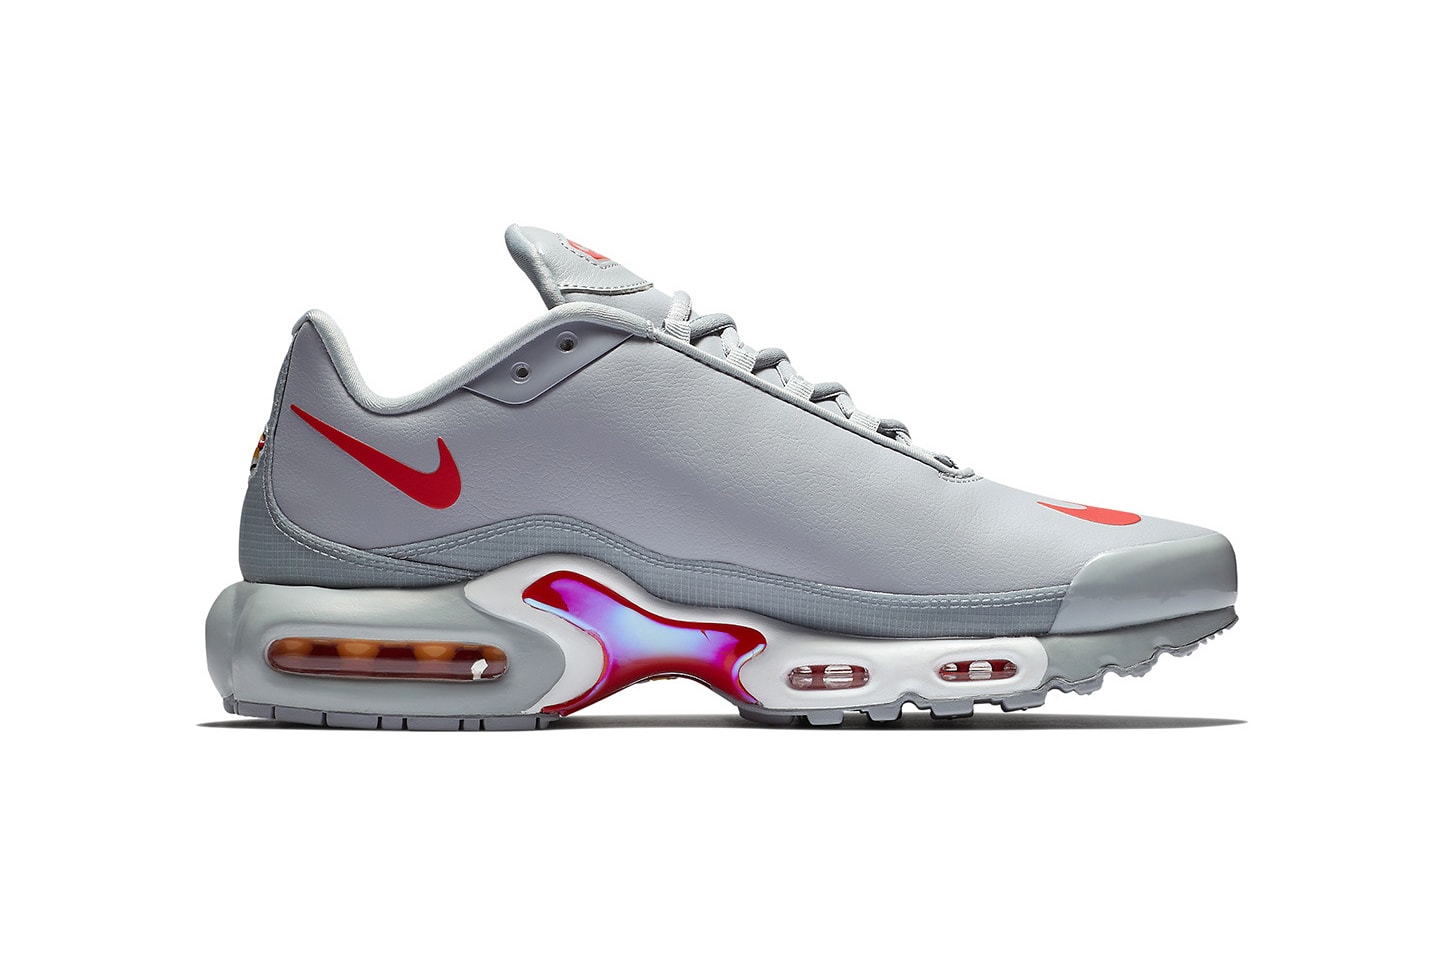 Nike Air Max Plus AQ1088 001 grey red white april may 2018 release date info drop sneakers shoes footwear